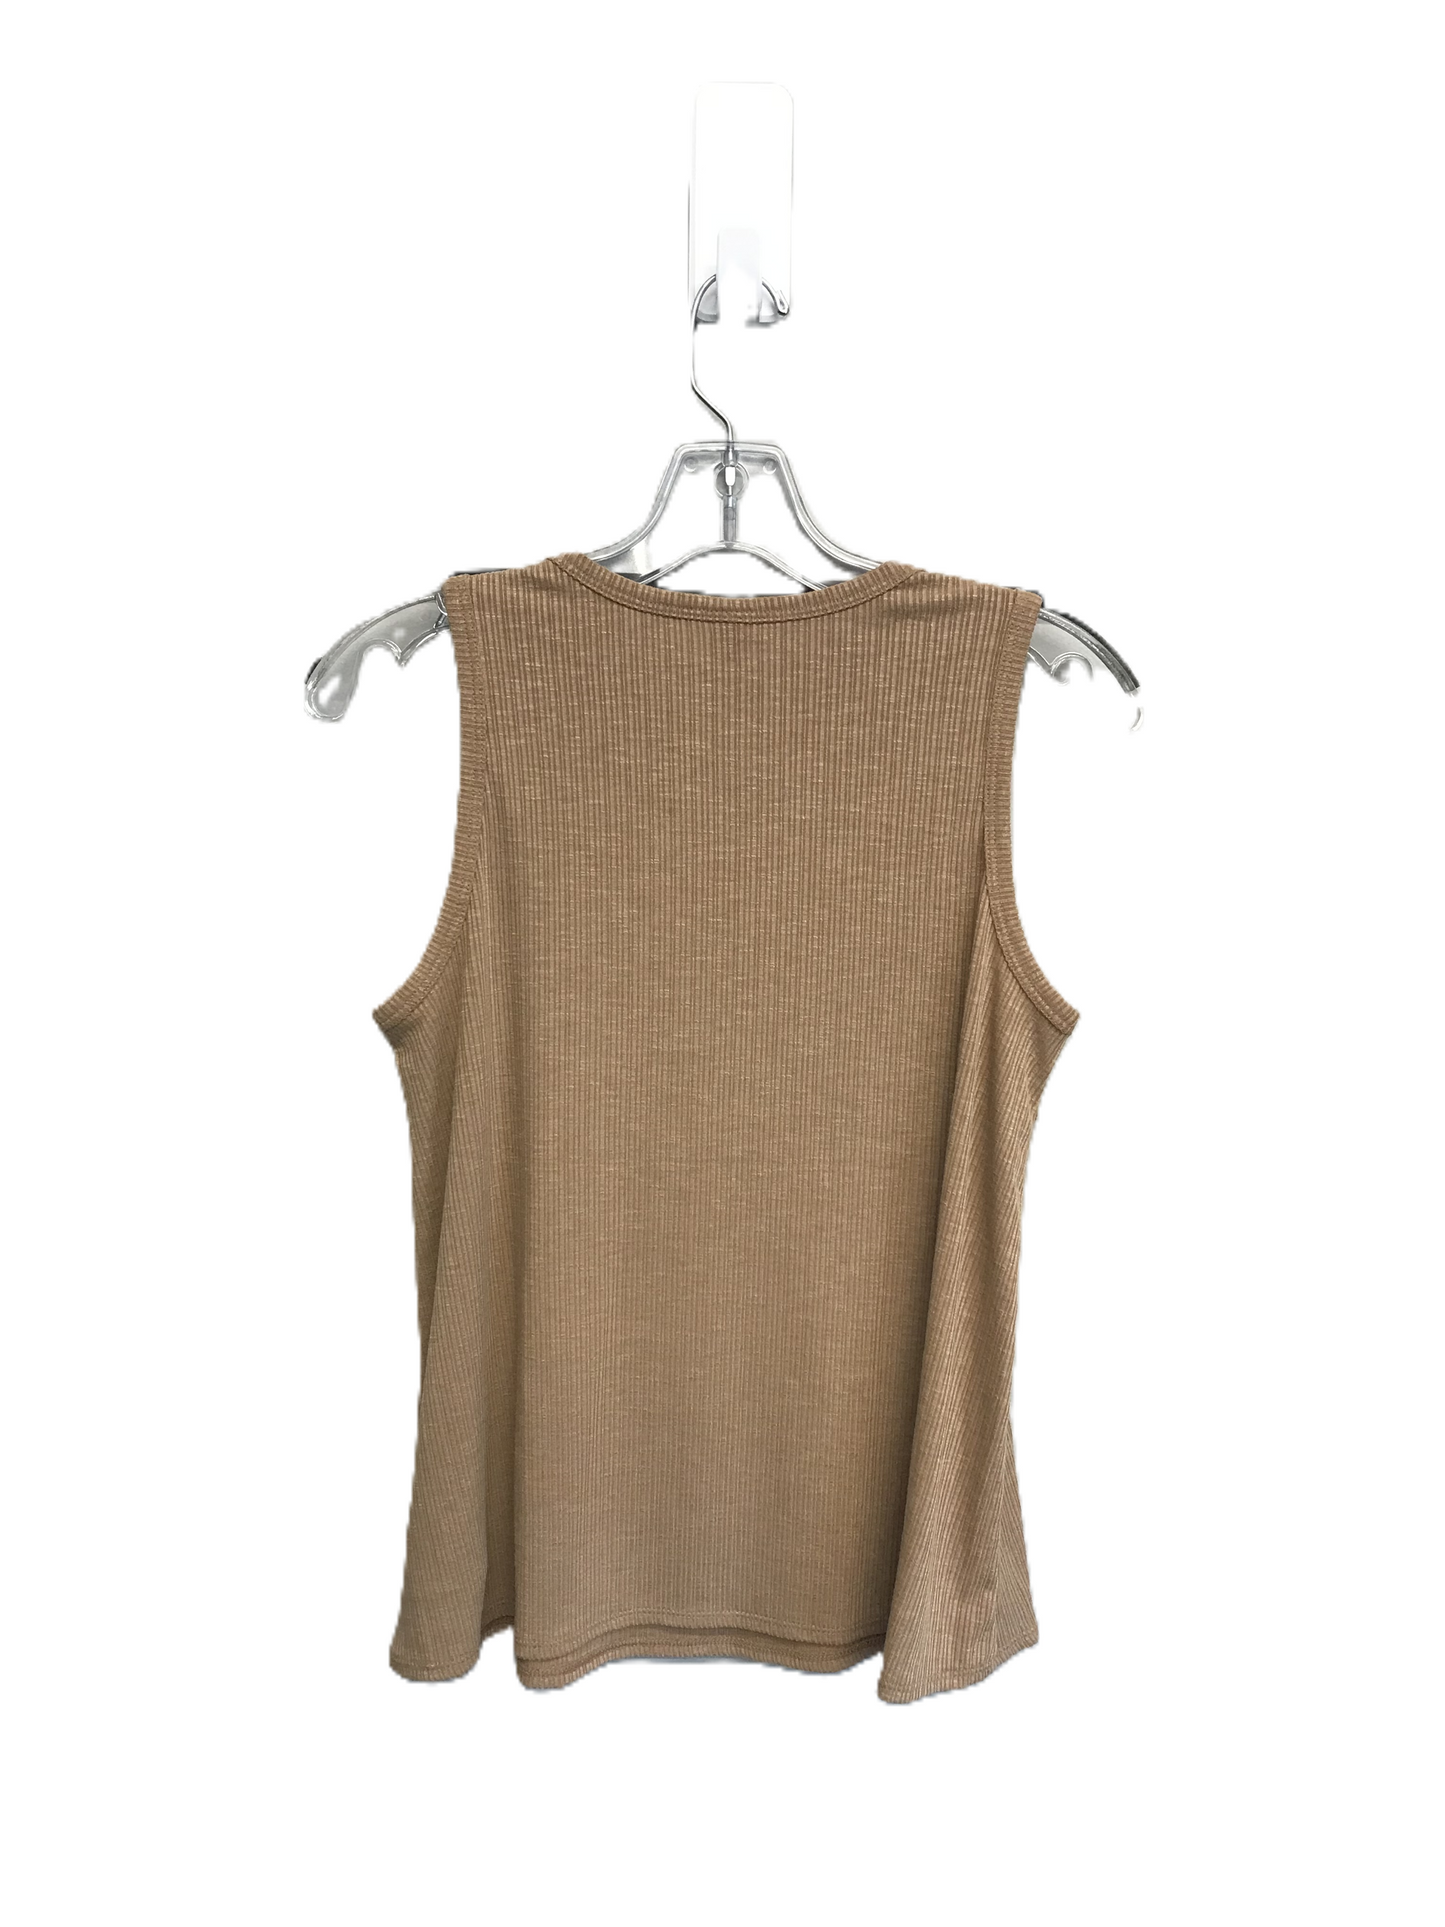 Brown Top Sleeveless By Old Navy, Size: Xs